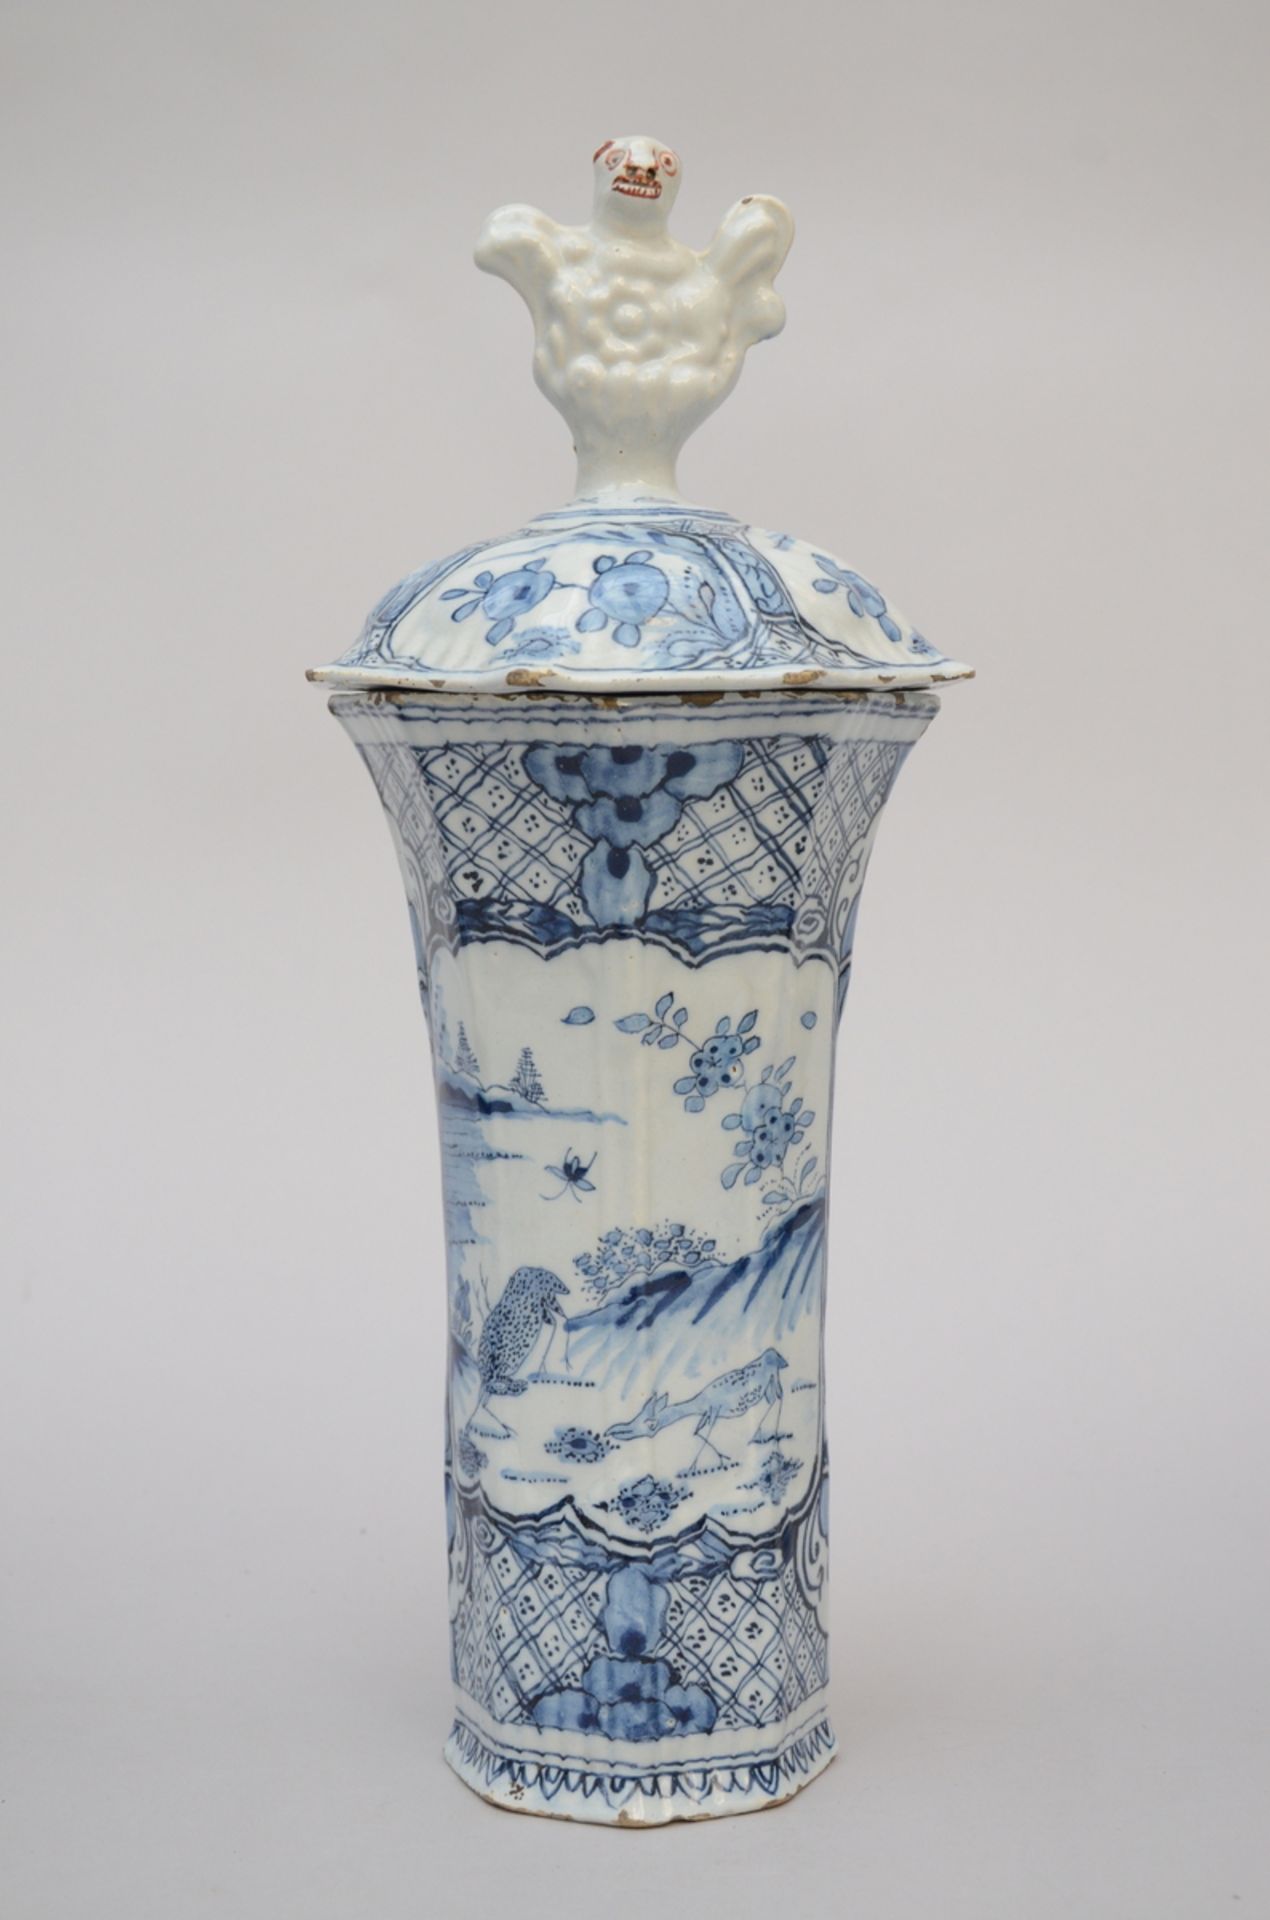 A five-piece blue and white set in Delft earthenware with chinoiserie decoration, 18th century ( - Image 3 of 6